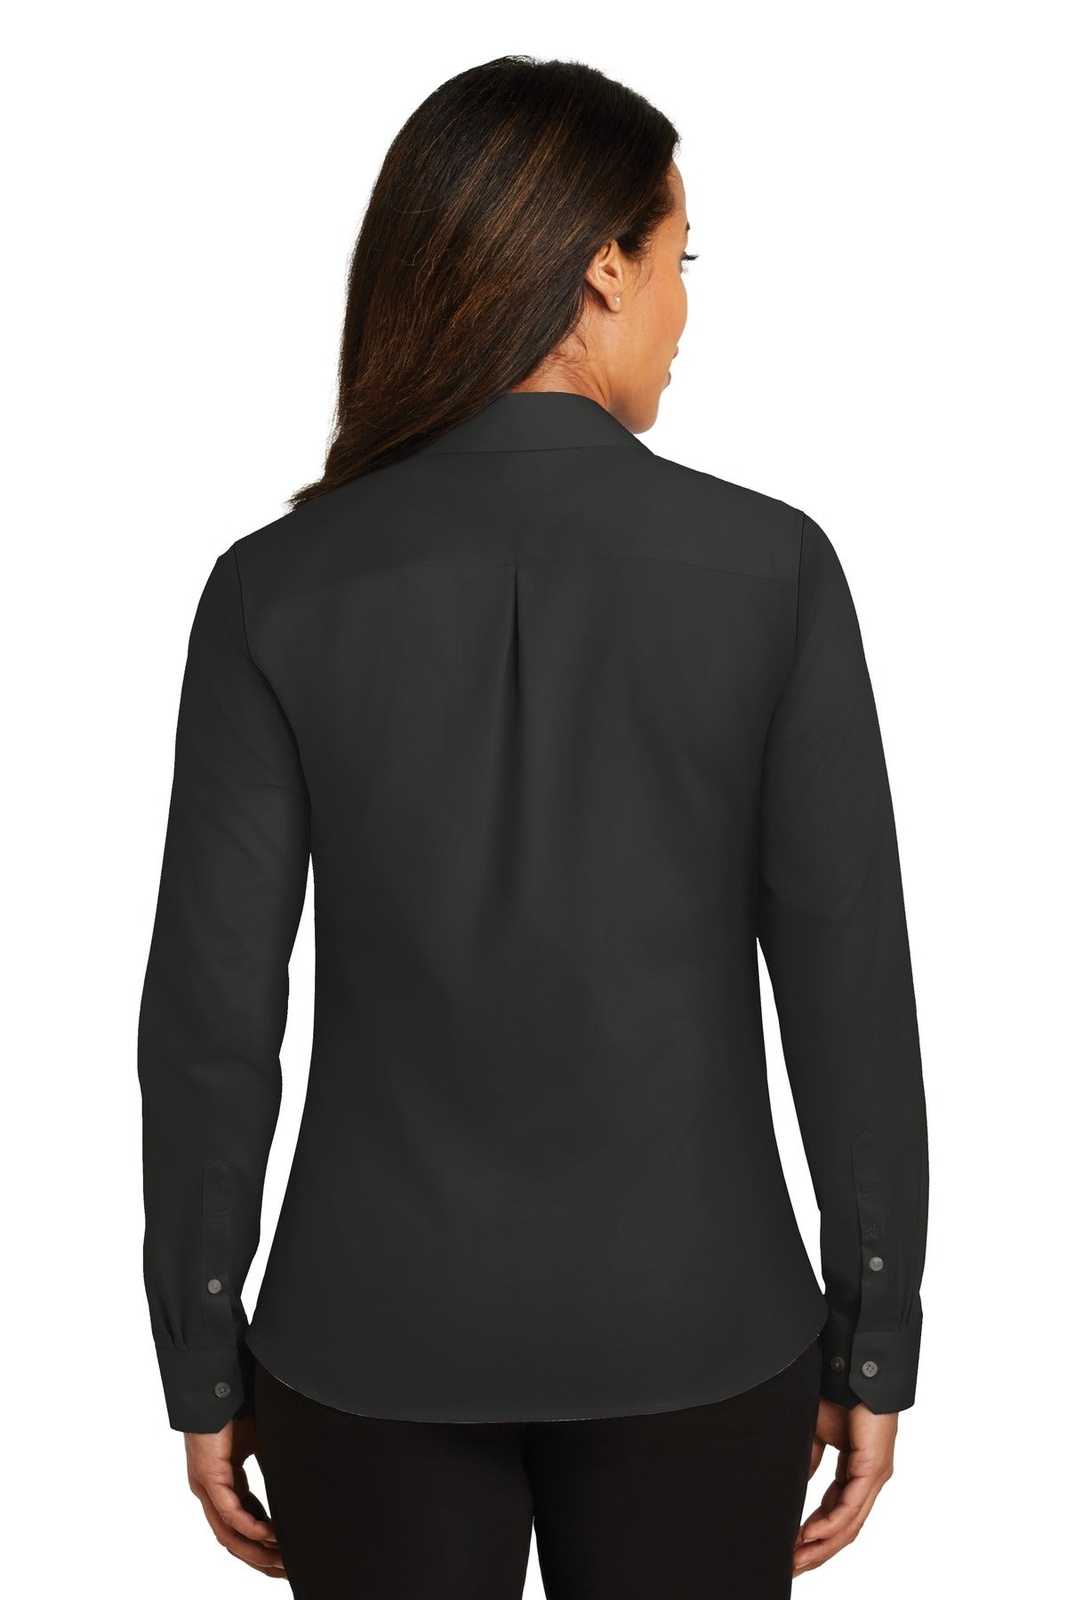 Red House RH79 Ladies Non-Iron Twill Shirt - Black - HIT a Double - 2